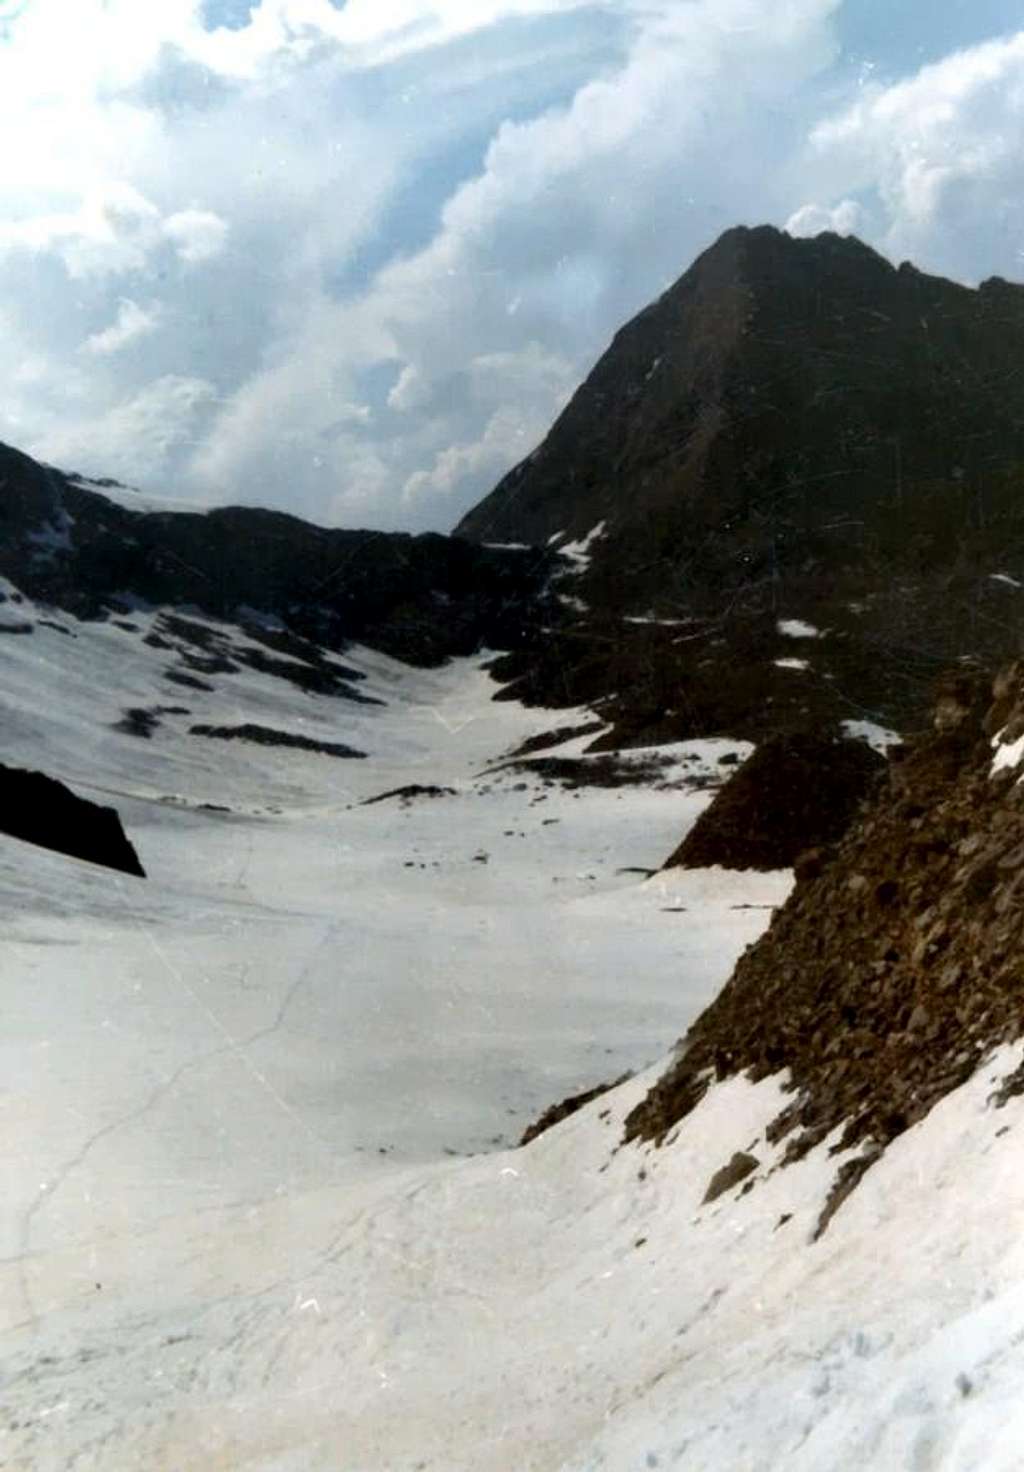 From CARREL Pass towards PECKOZ and BLANTSETTE Pass